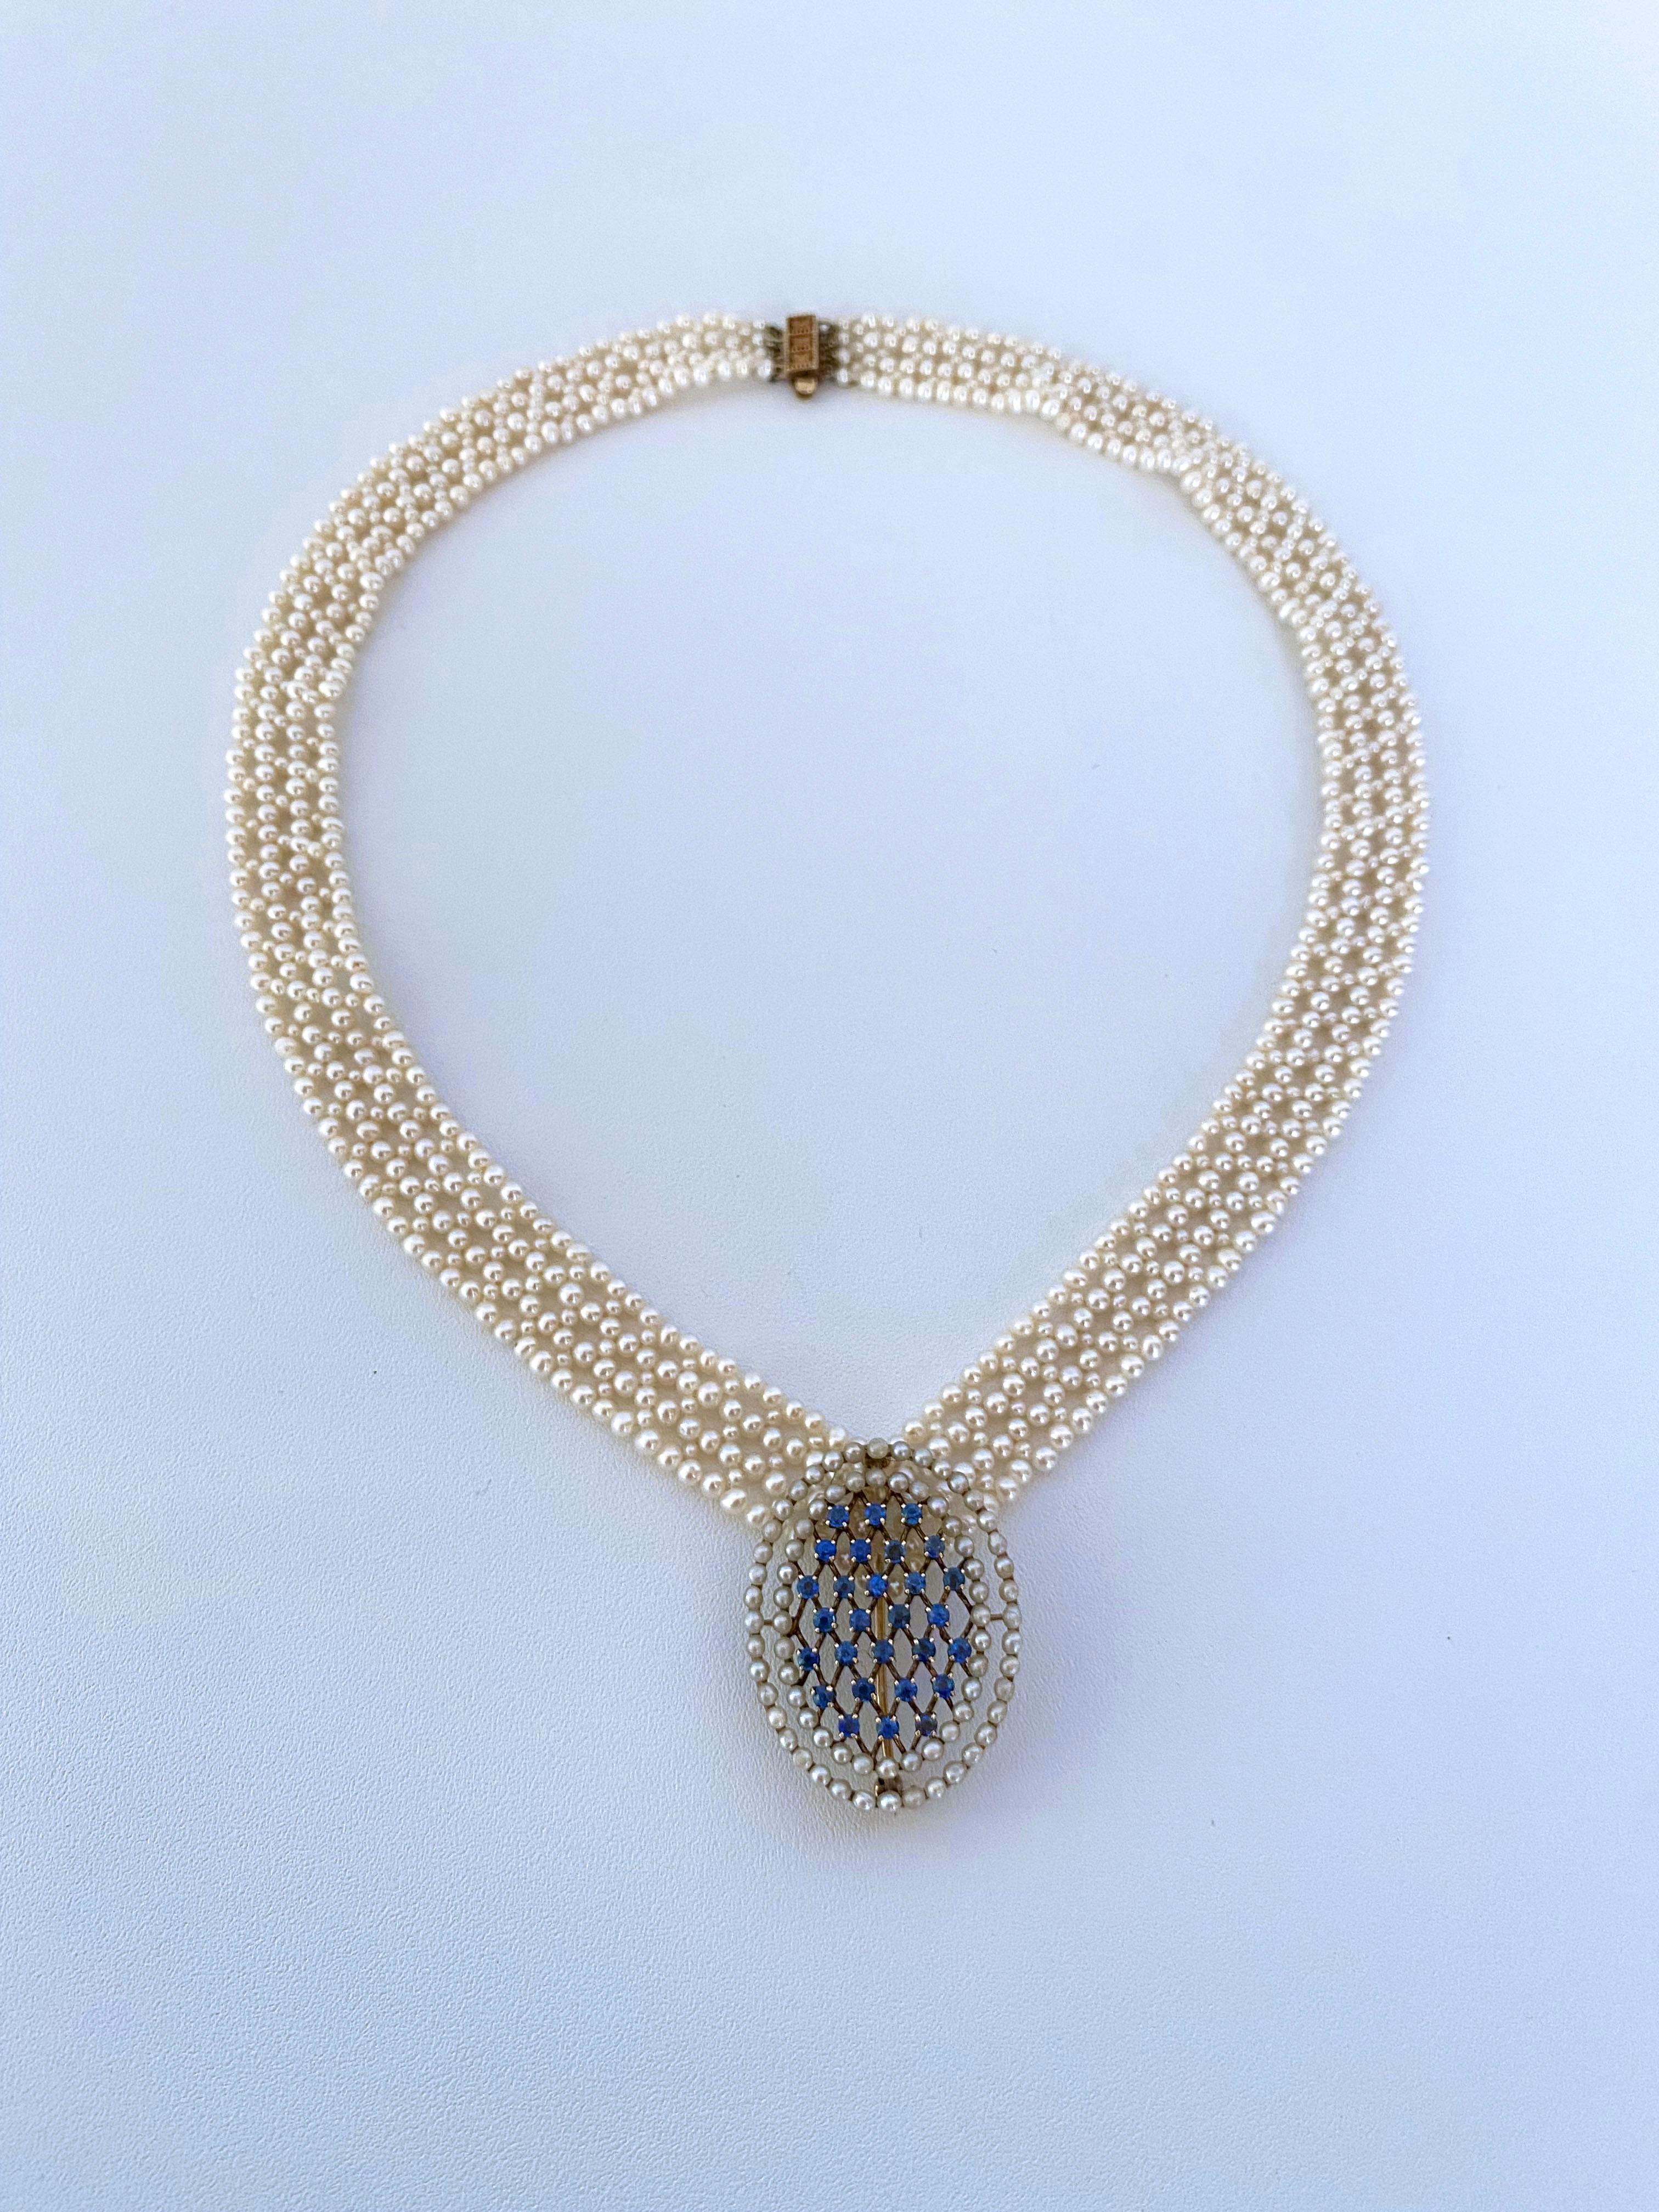 Marina J. Pearl woven Necklace with 14k Vintage Blue Sapphire & Pearl Brooch For Sale 3